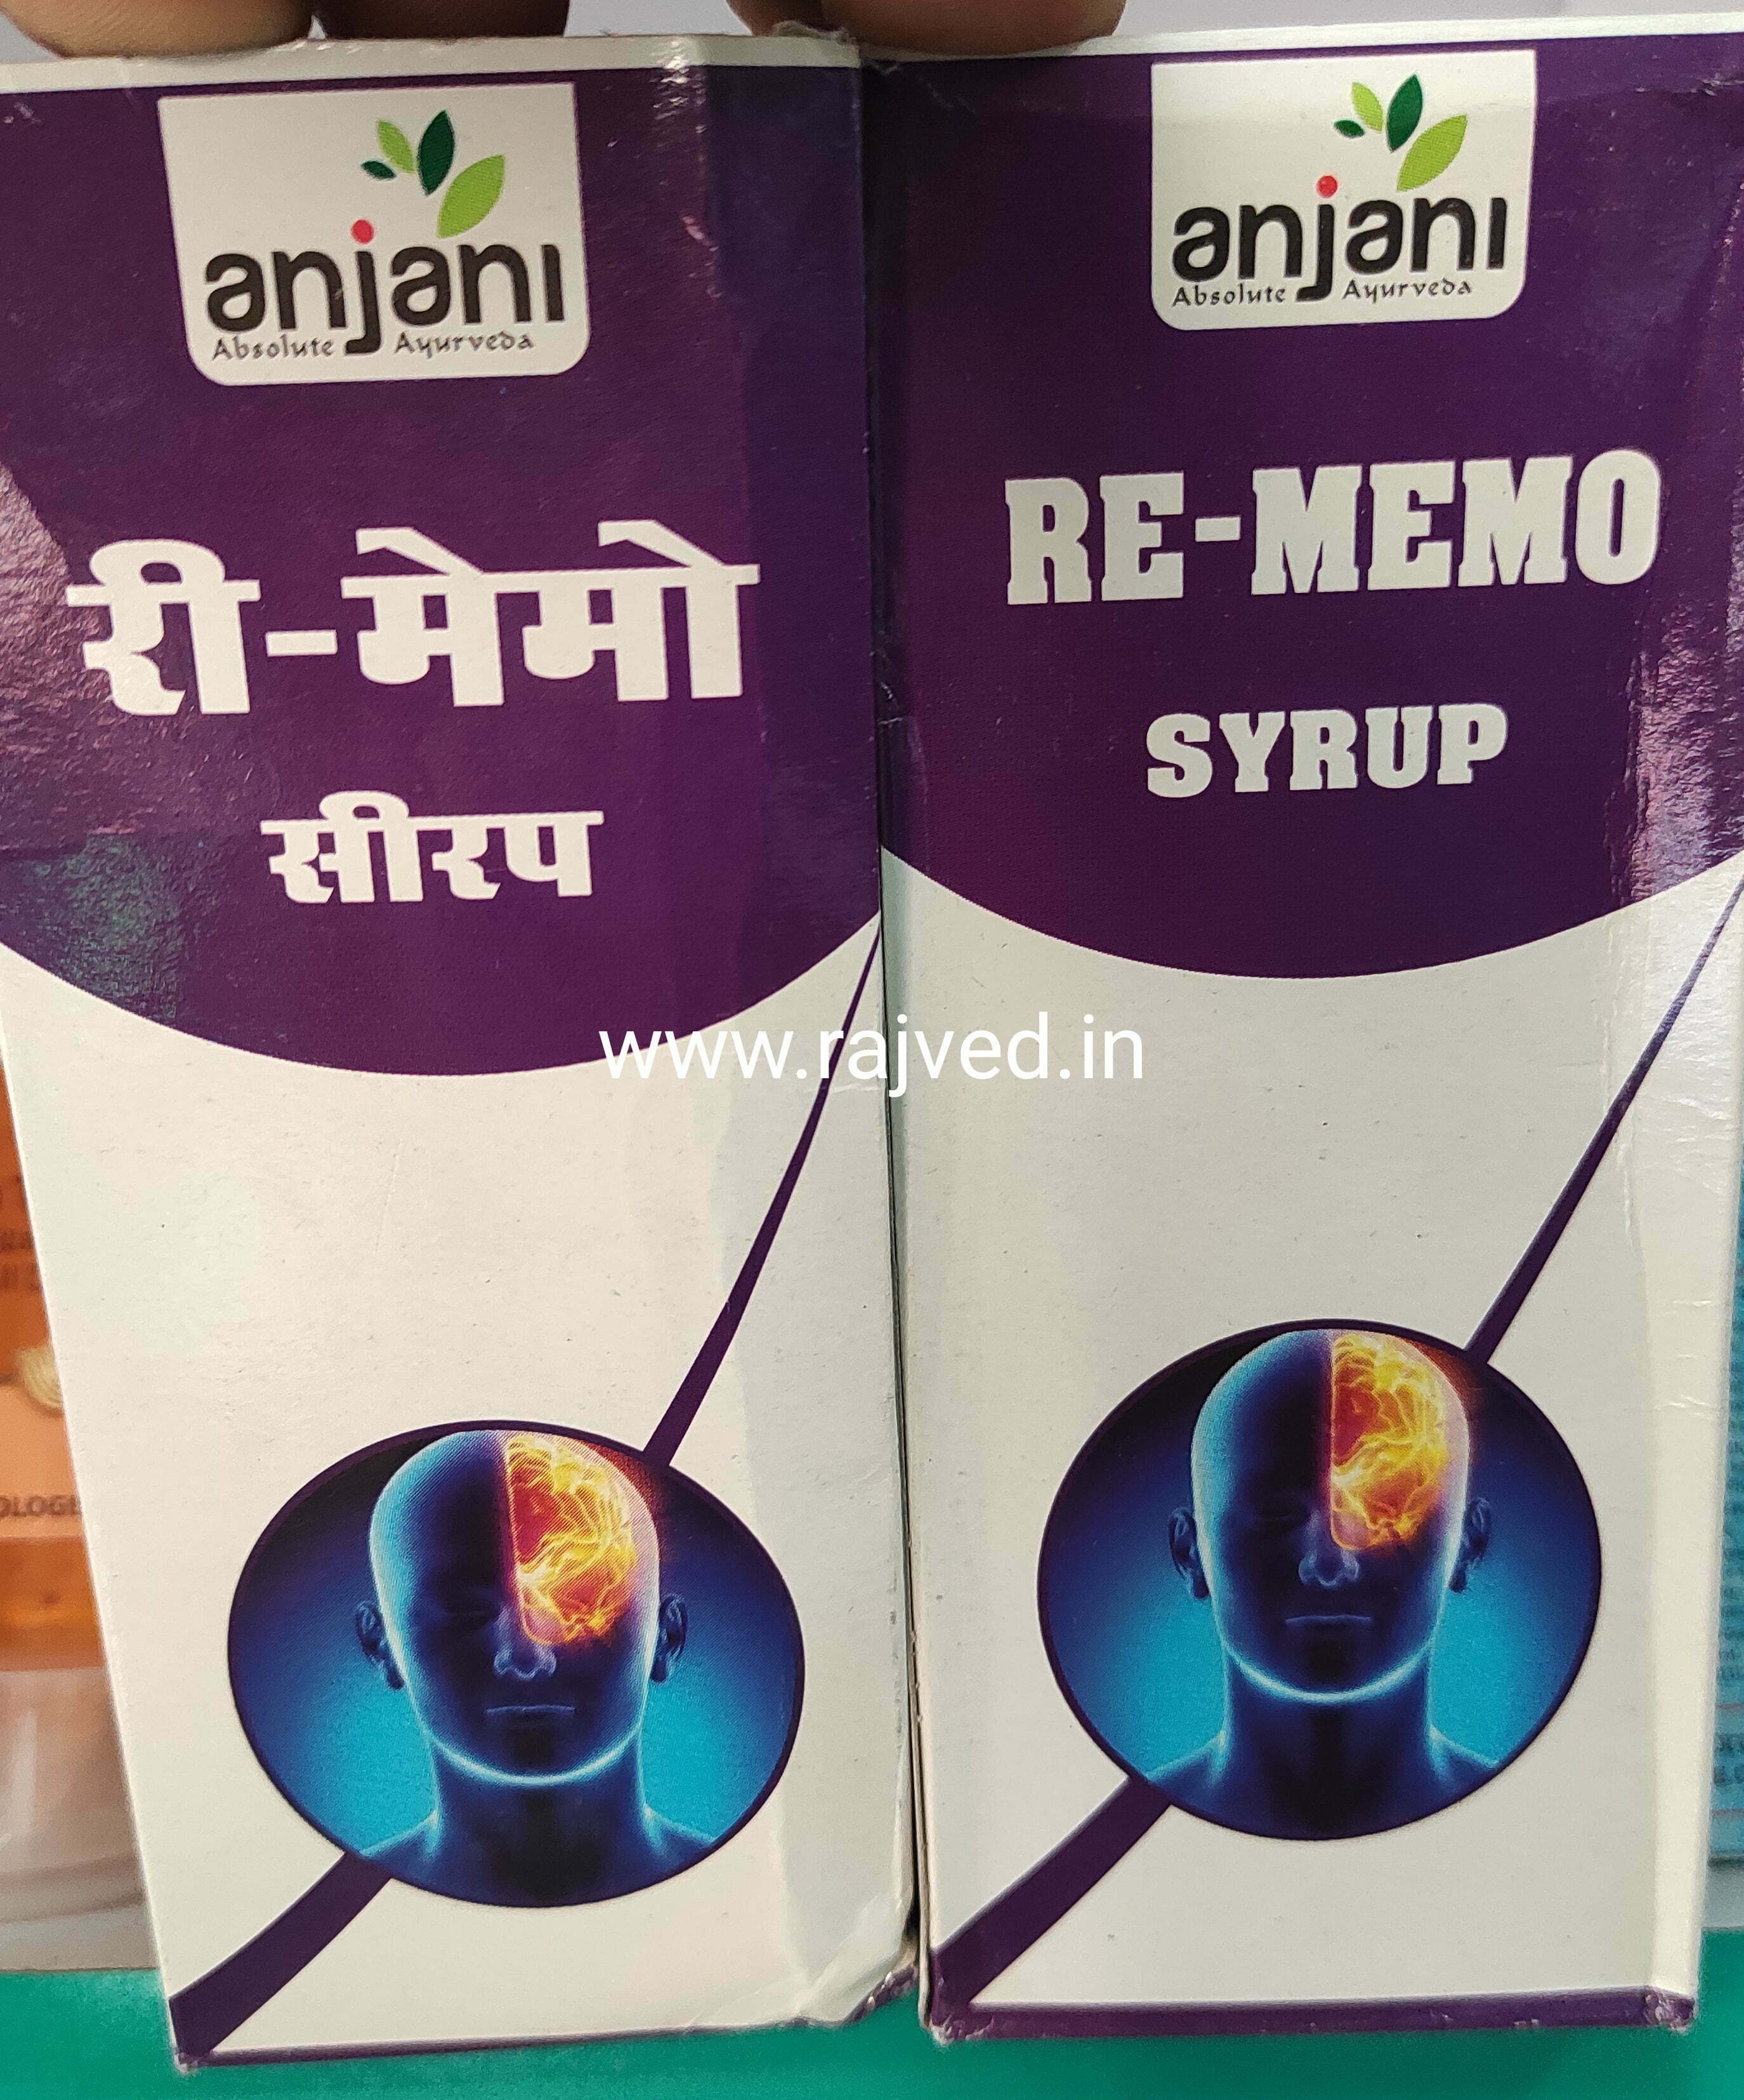 Re-Memo syrup 200 ml upto 20% off Anjani Pharmaceuticals